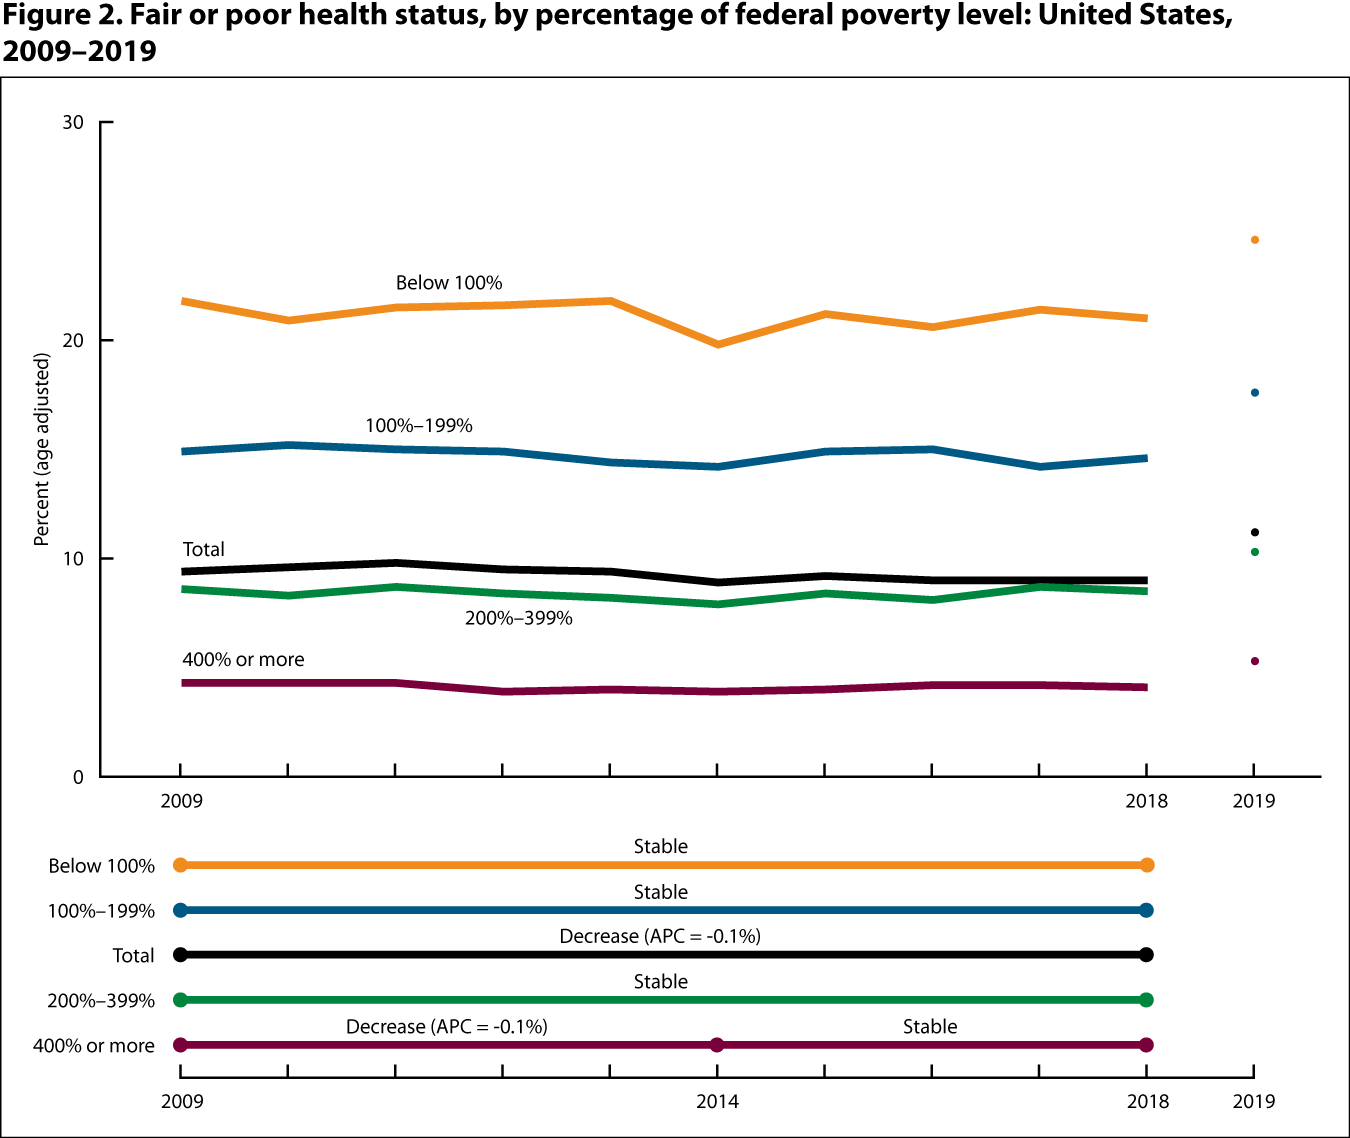 Figure 2 is a line graph showing the percentage of people who reported fair or poor health status, by level of poverty for 2009 through 2018 and at 2019 (point).